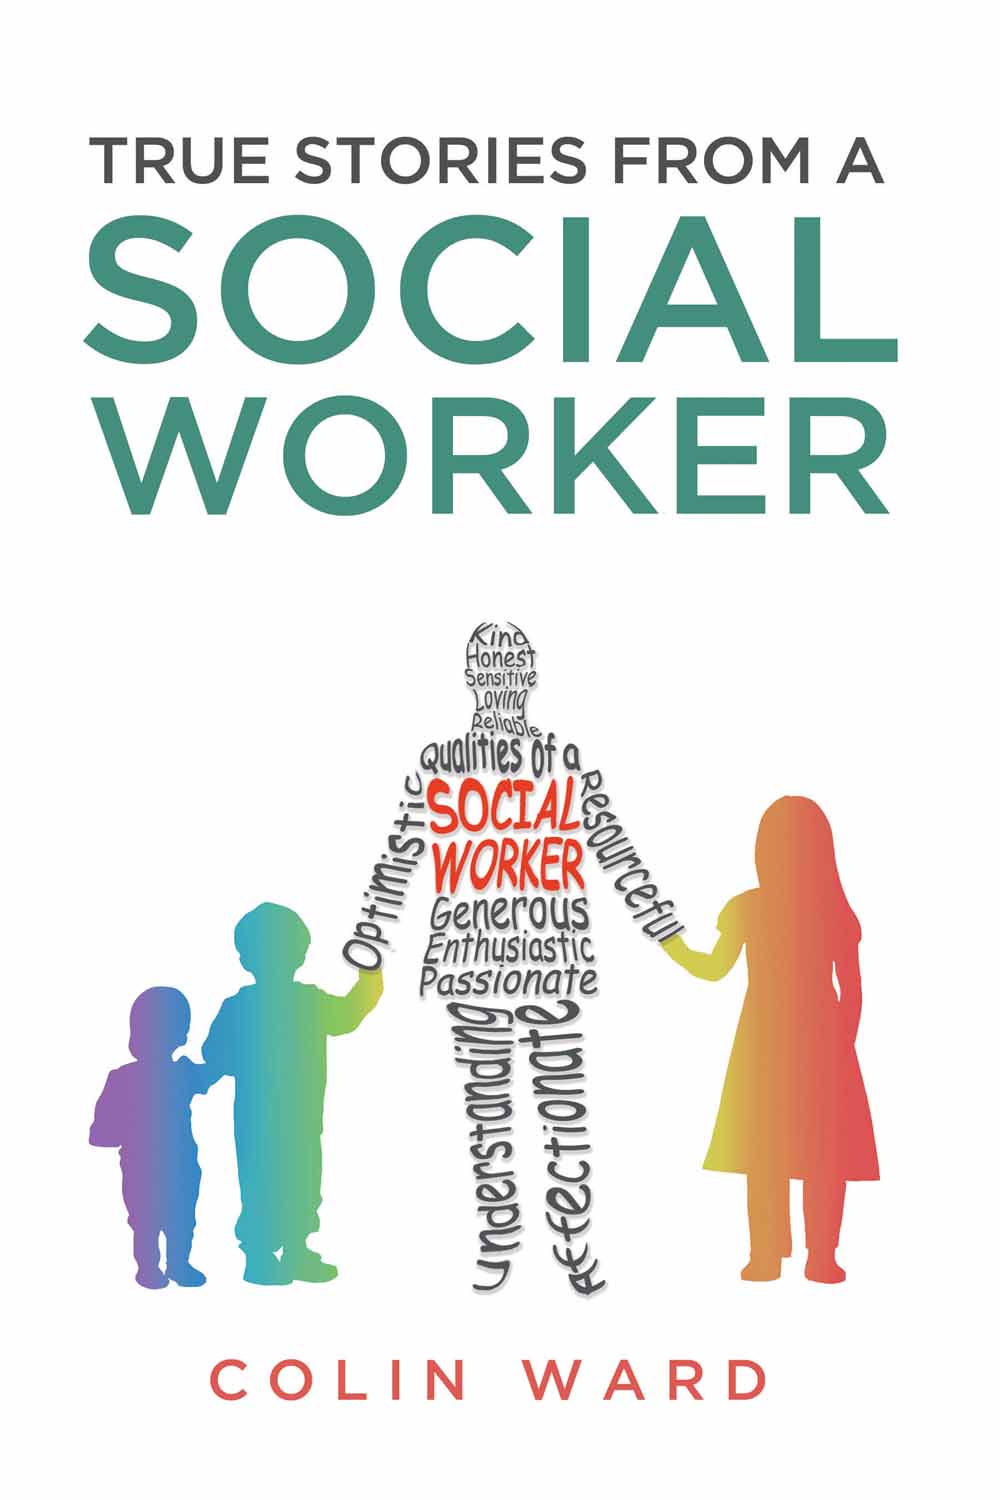 True Stories from a Social Worker